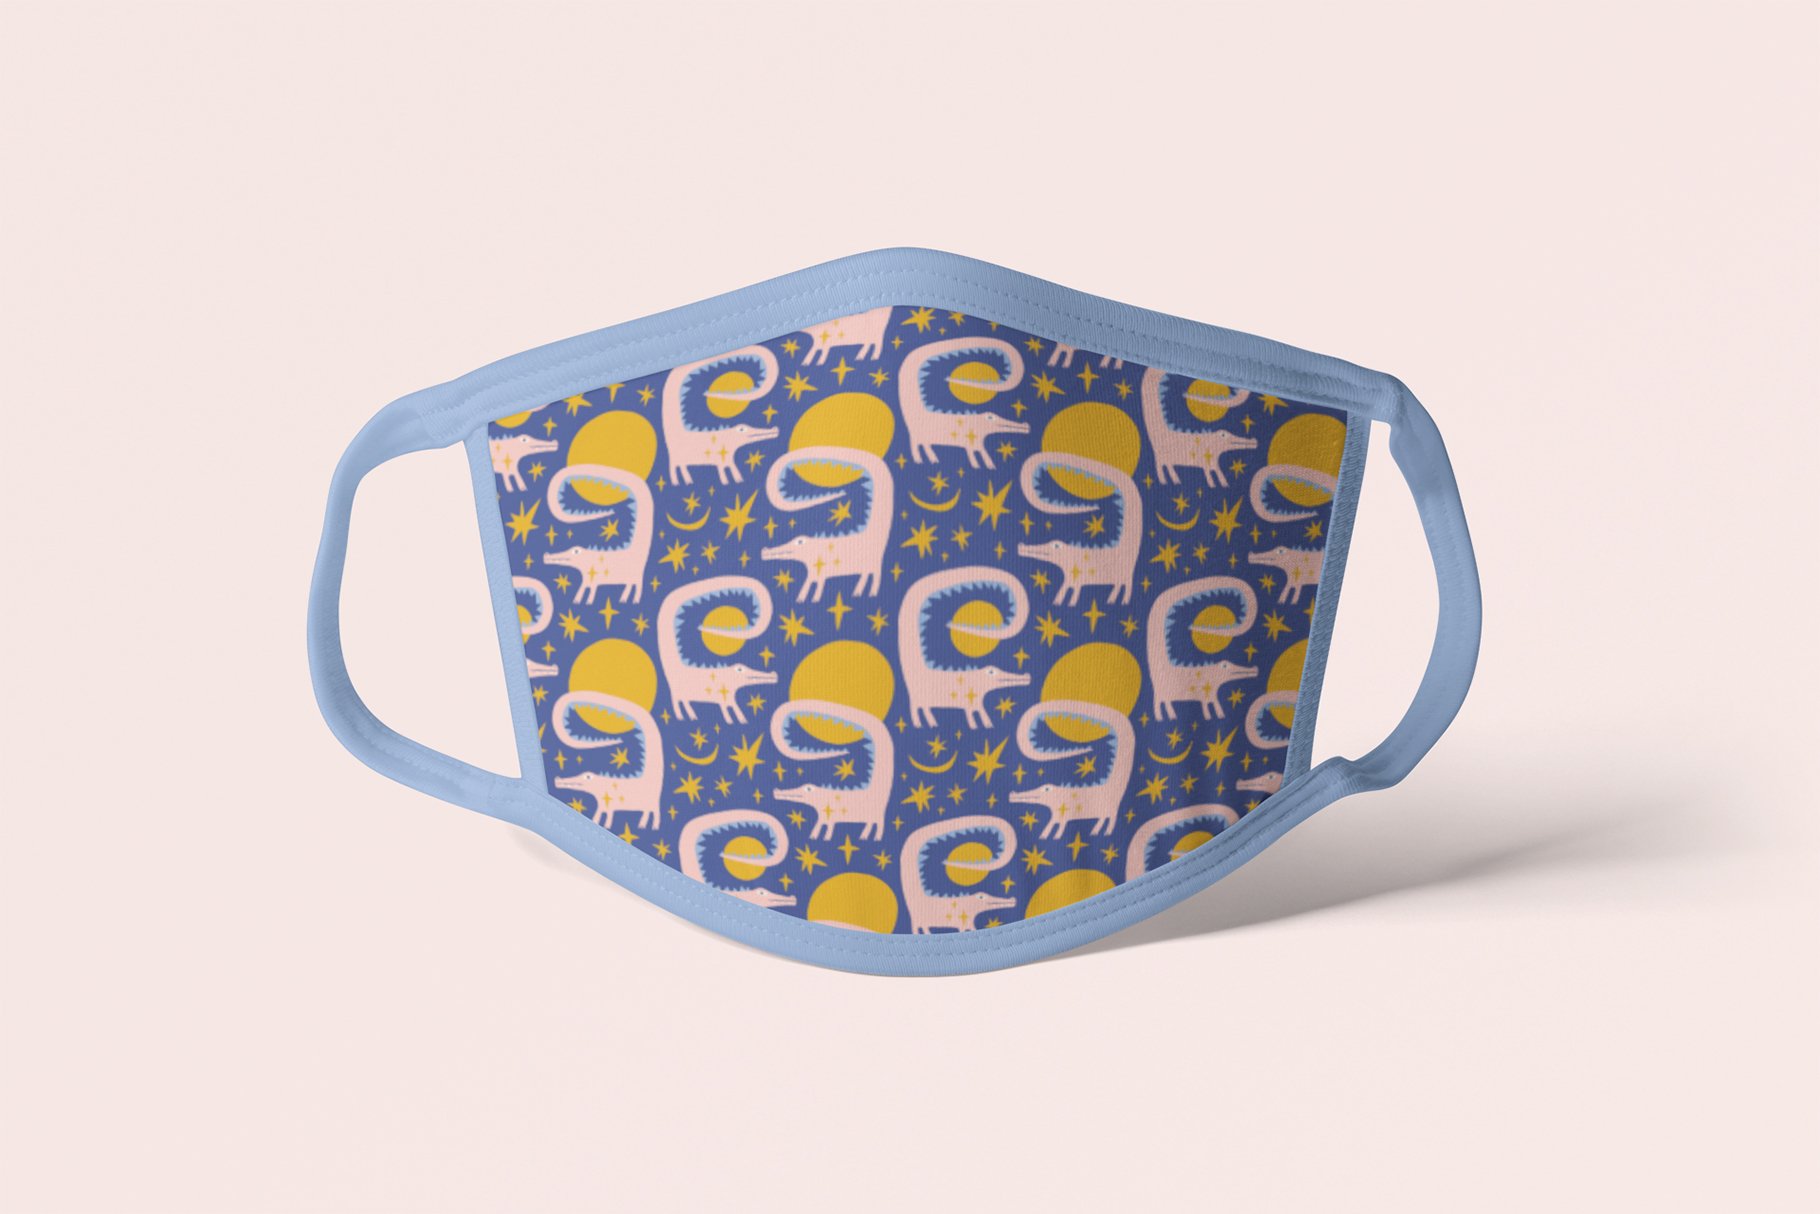 Classic Covid mask with print.